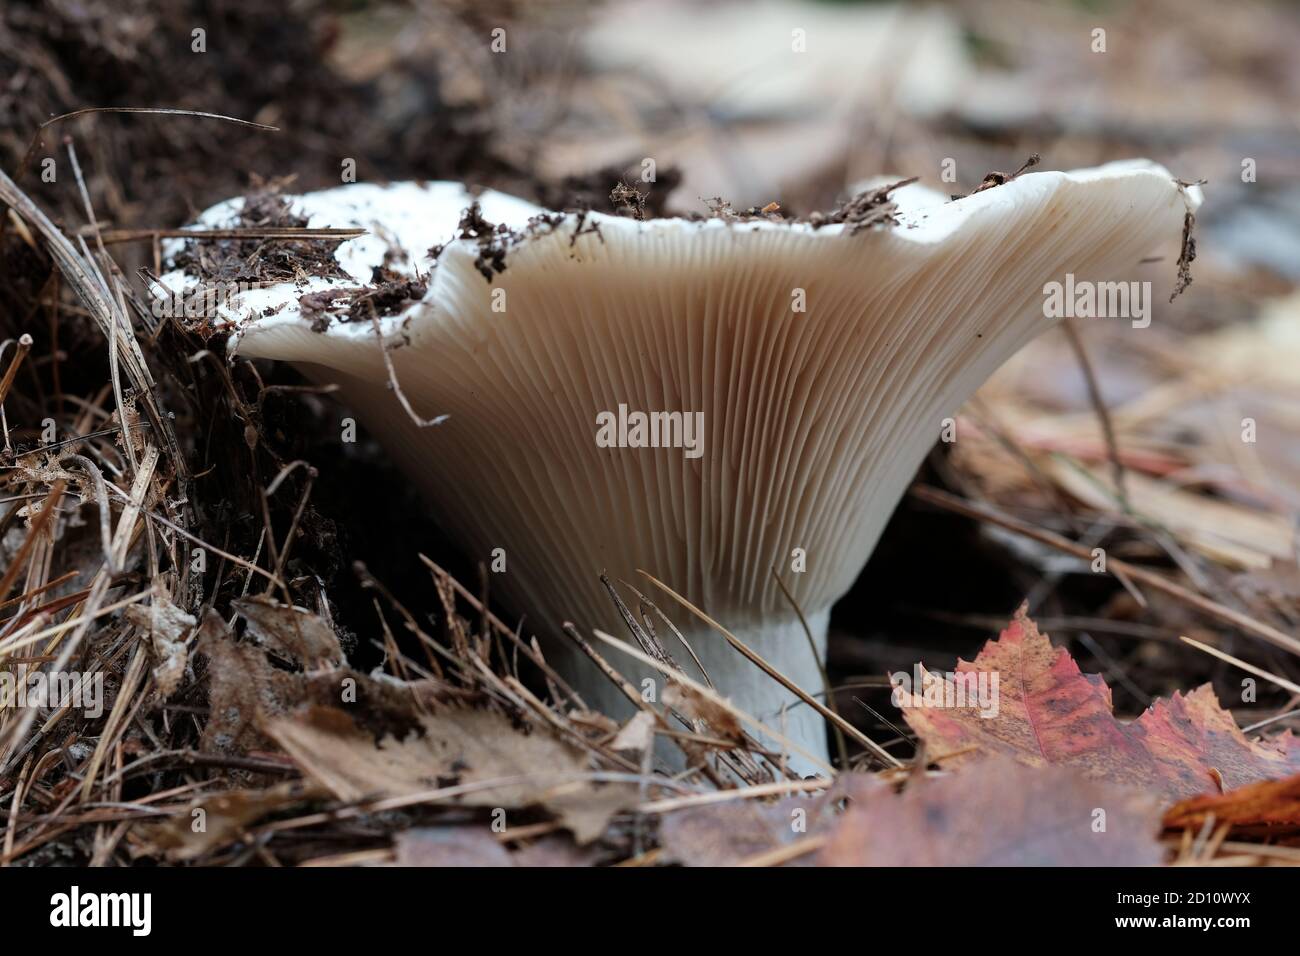 Short stemmed russula (Russula brevipes) bursting up through the forest floor mulch in Wakefield, Quebec, Canada. Stock Photo